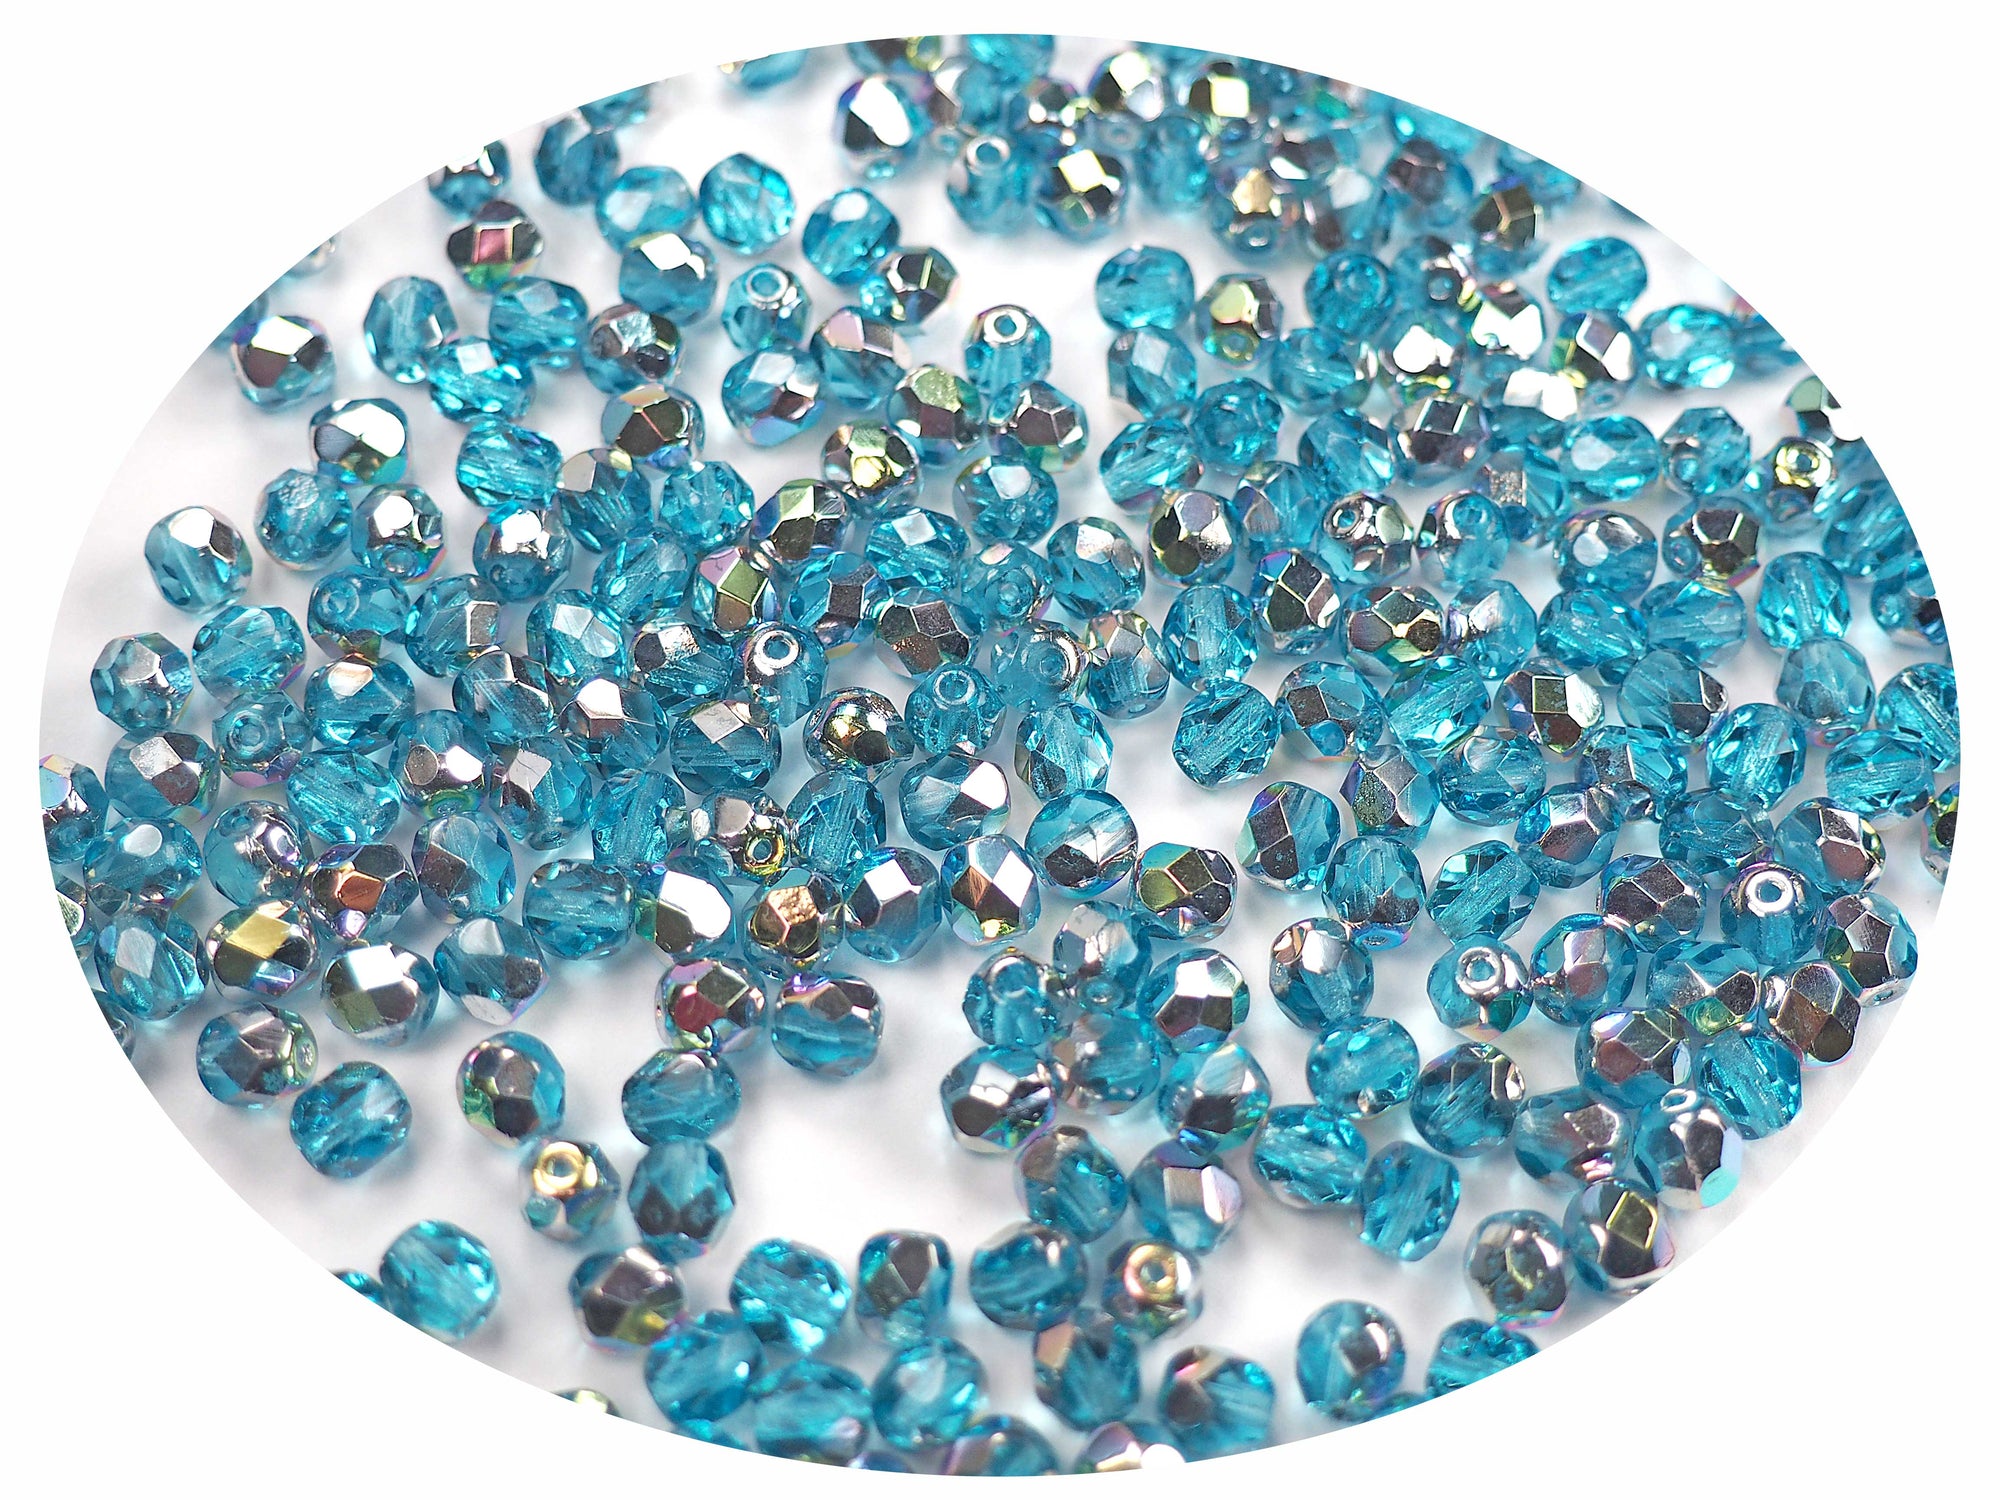 Aqua VL Vitrail Light coated, Czech Fire Polished Round Faceted Glass Beads, 16 inch strand, 4mm, 6mm